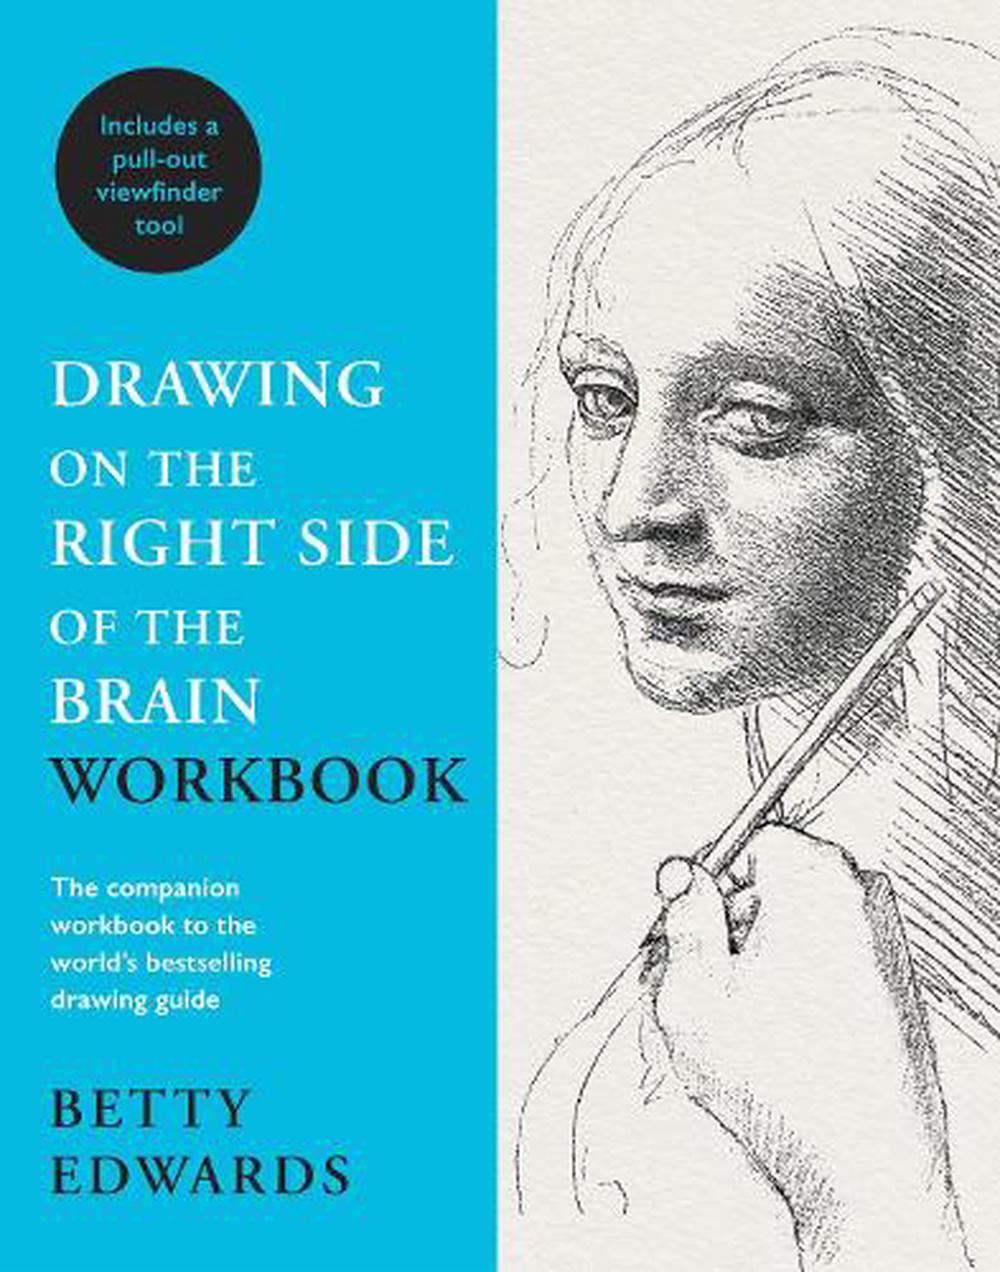 Drawing on the Right Side of the Brain Workbook by Betty Edwards